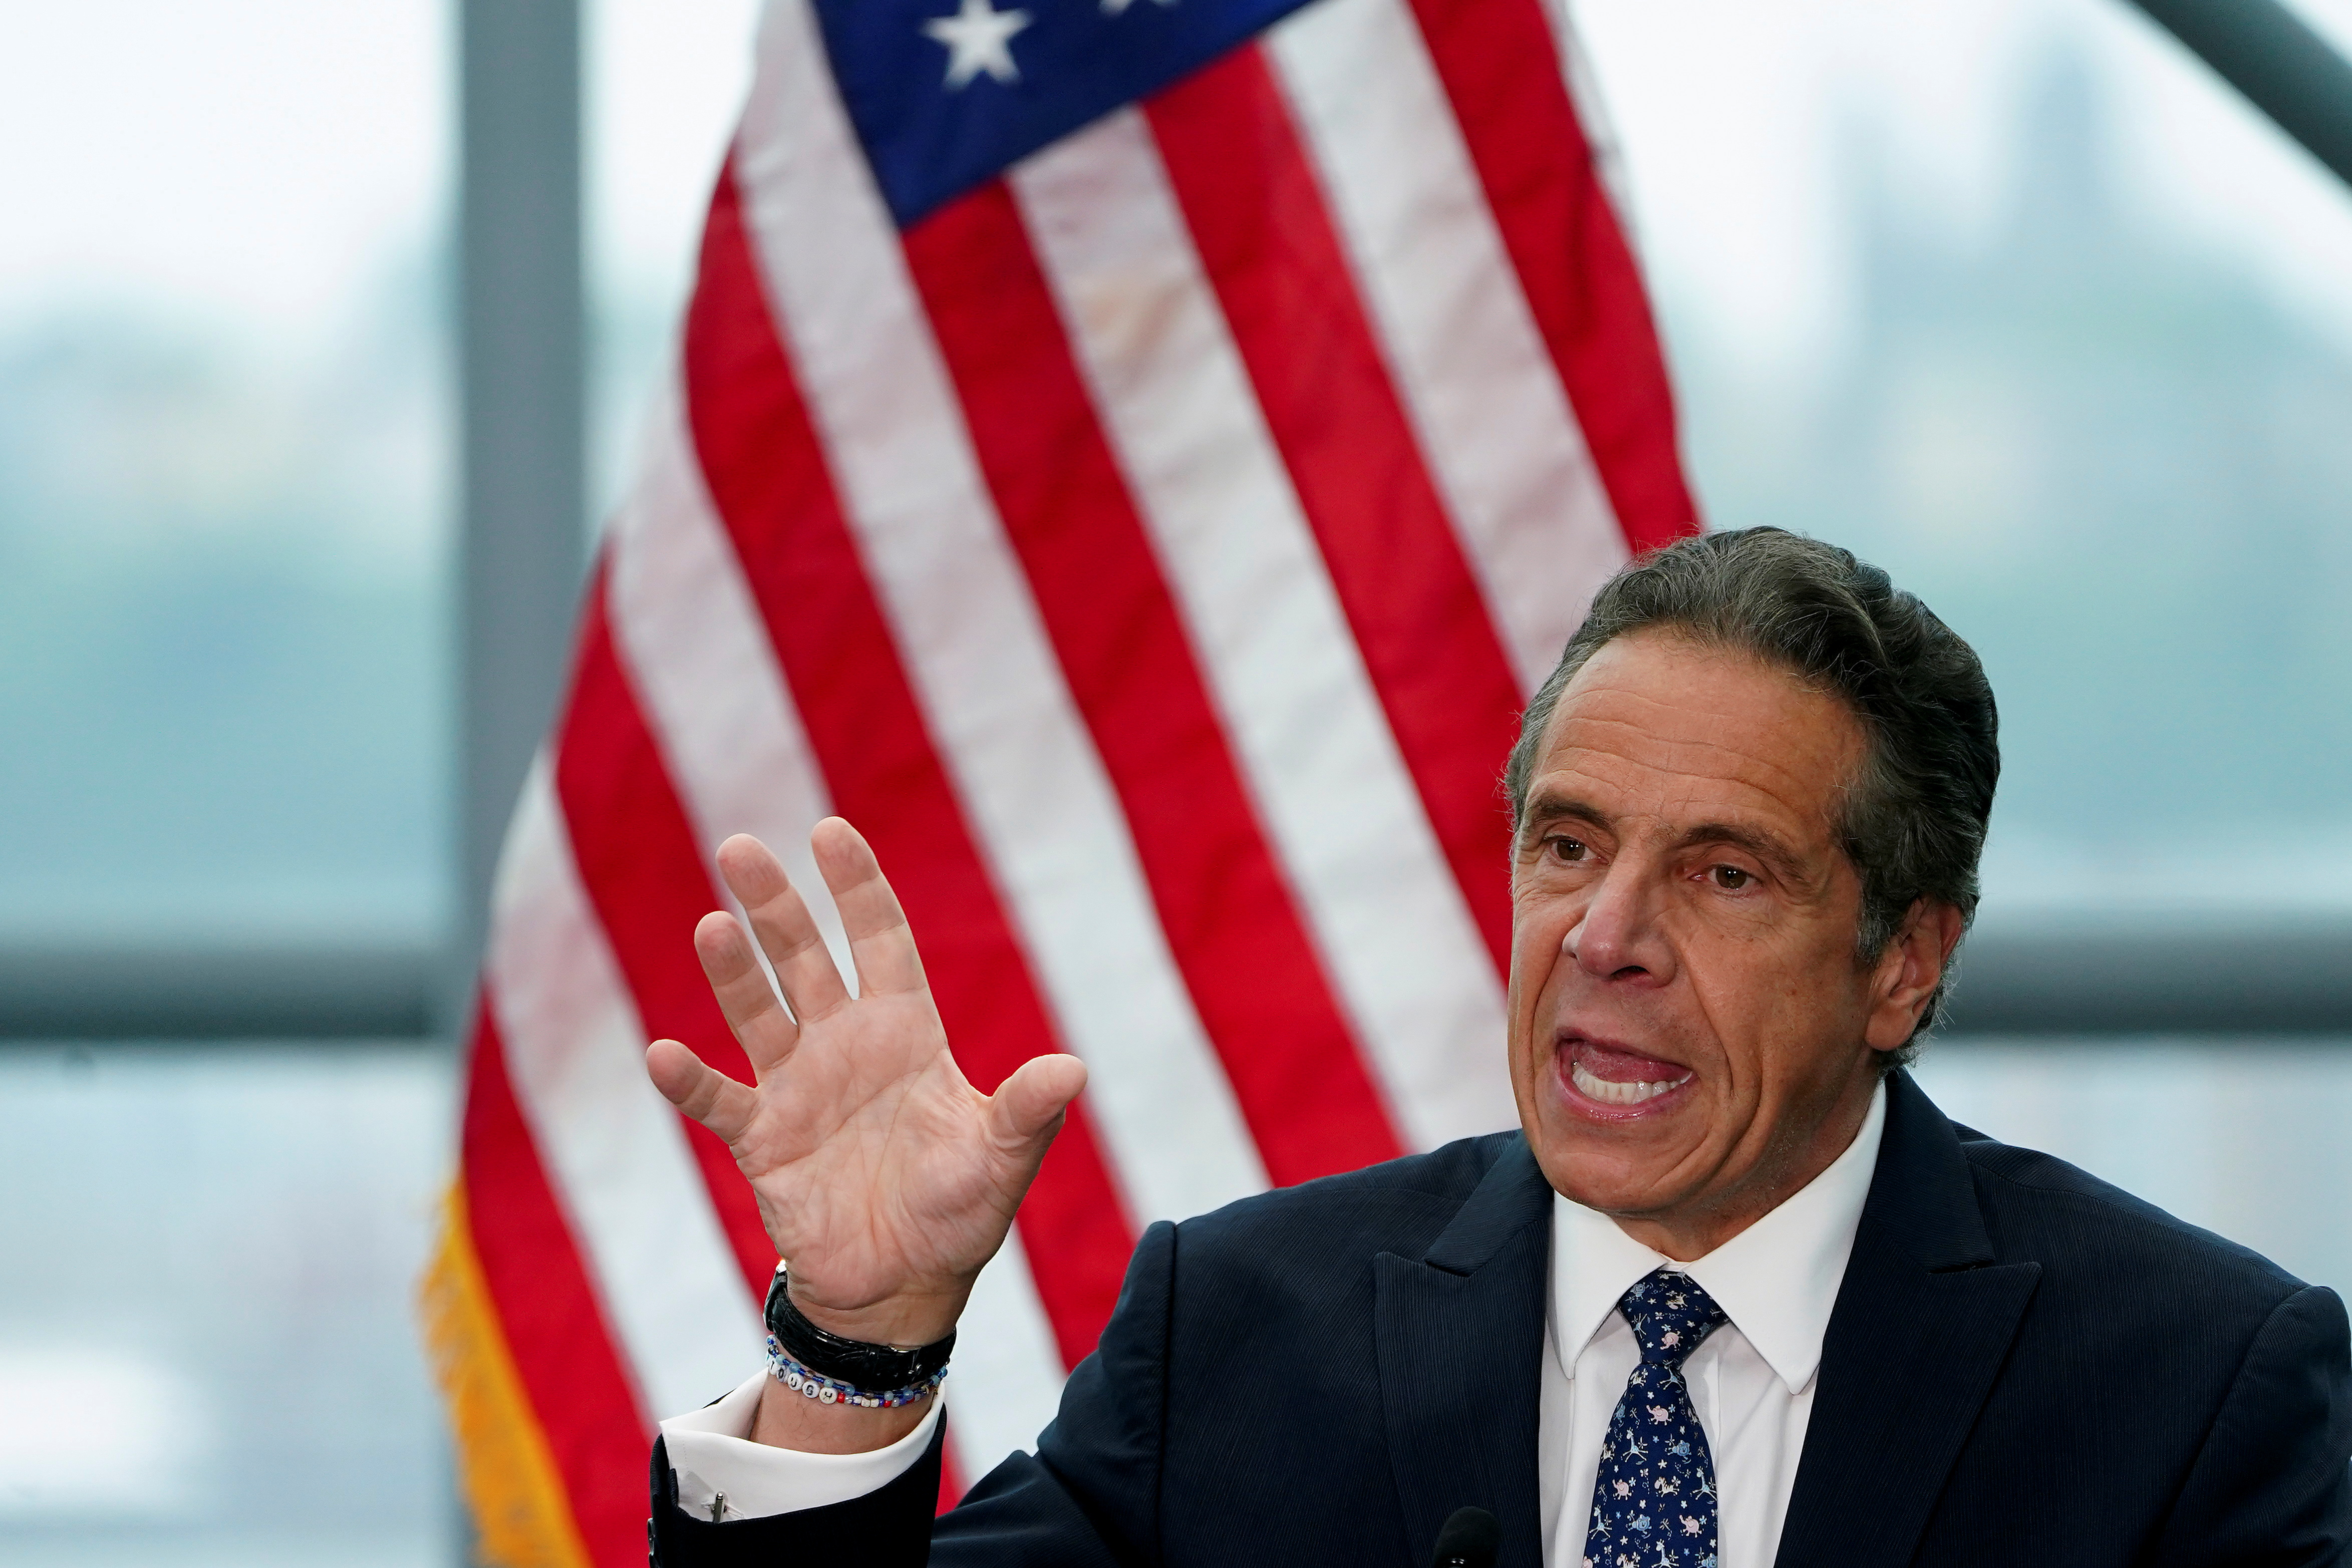 New York Governor Andrew Cuomo gives a press conference in New York City